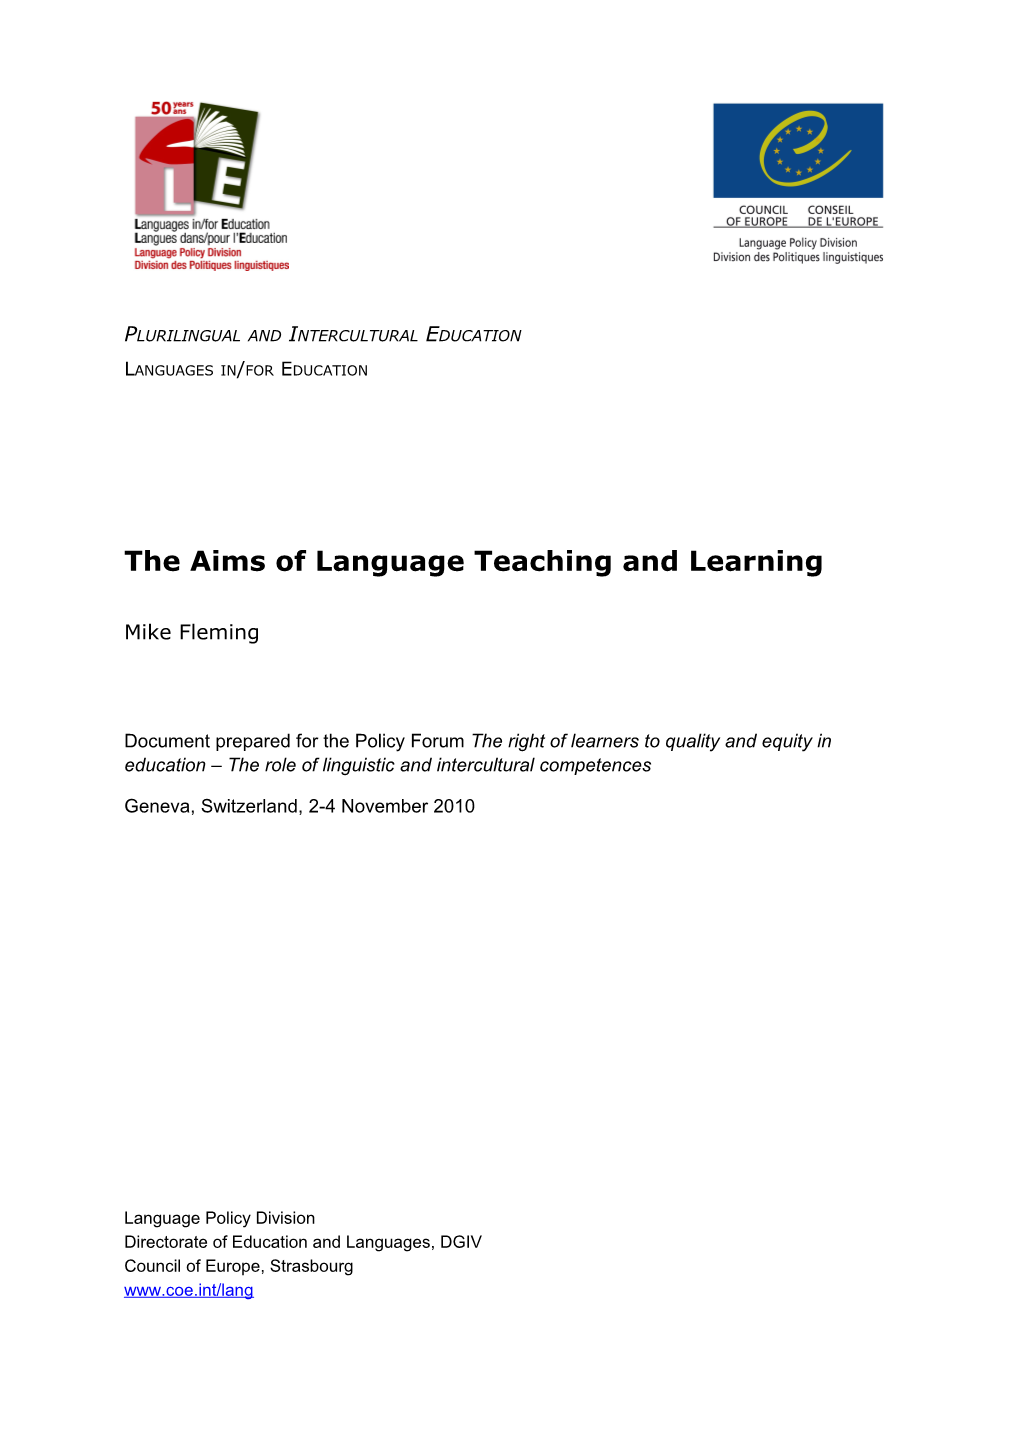 The Aims of Language Teaching and Learning